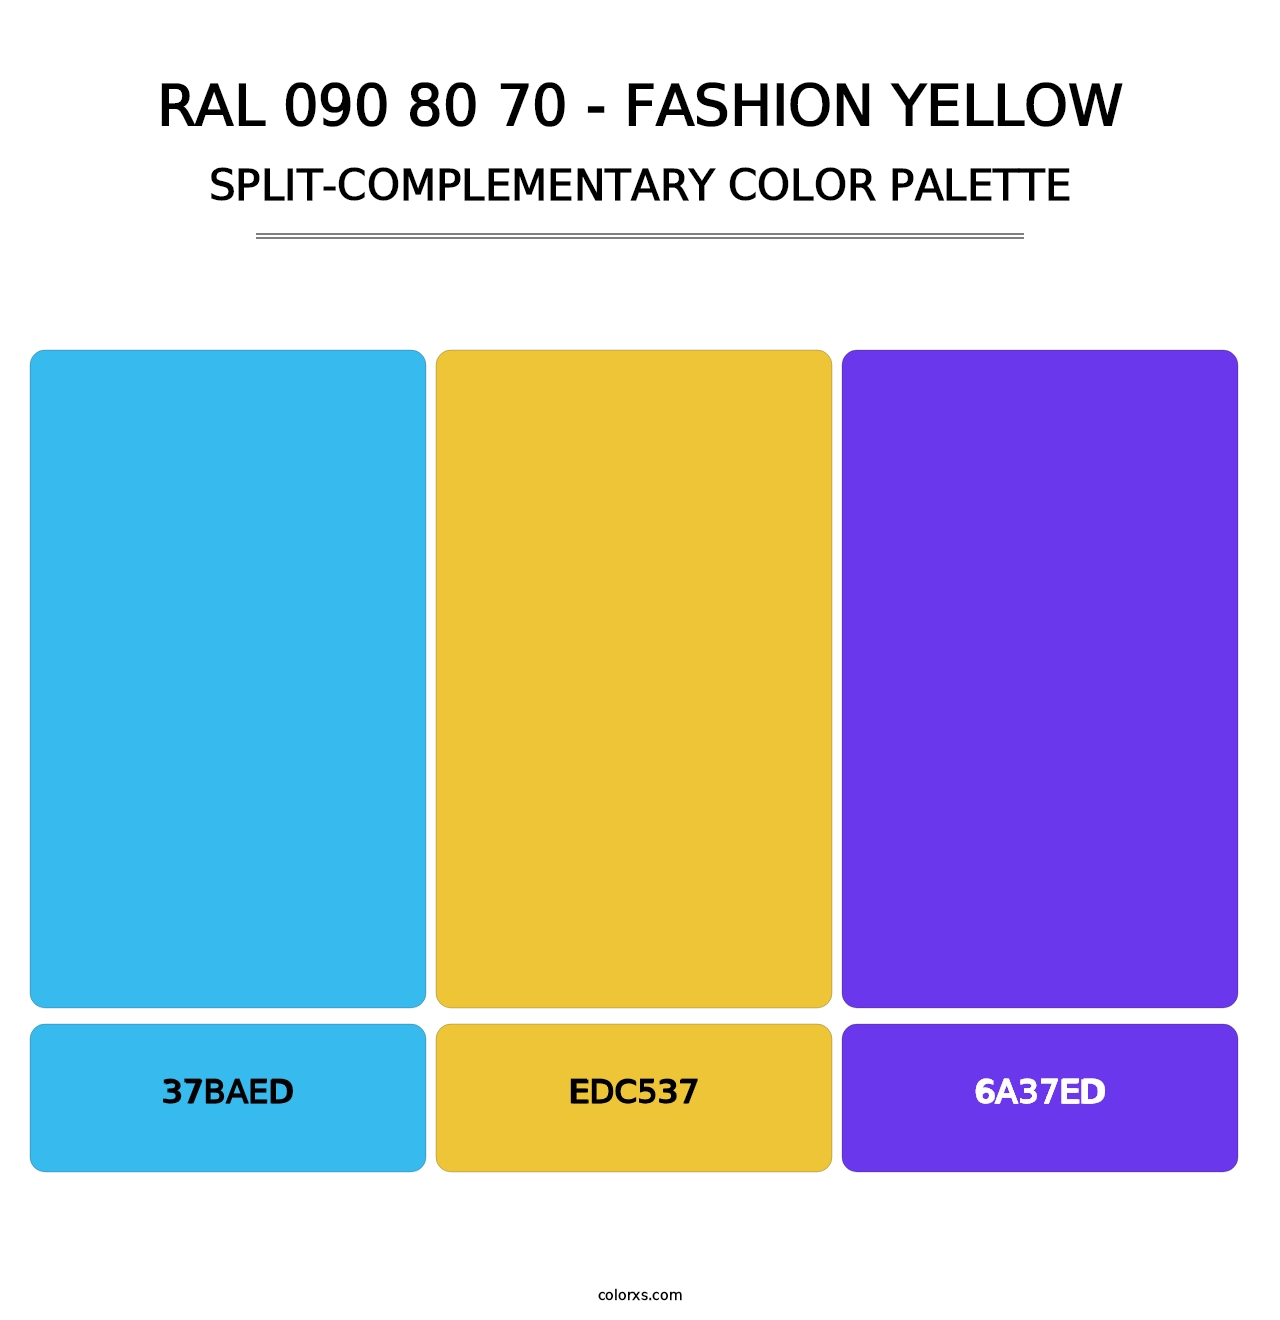 RAL 090 80 70 - Fashion Yellow - Split-Complementary Color Palette